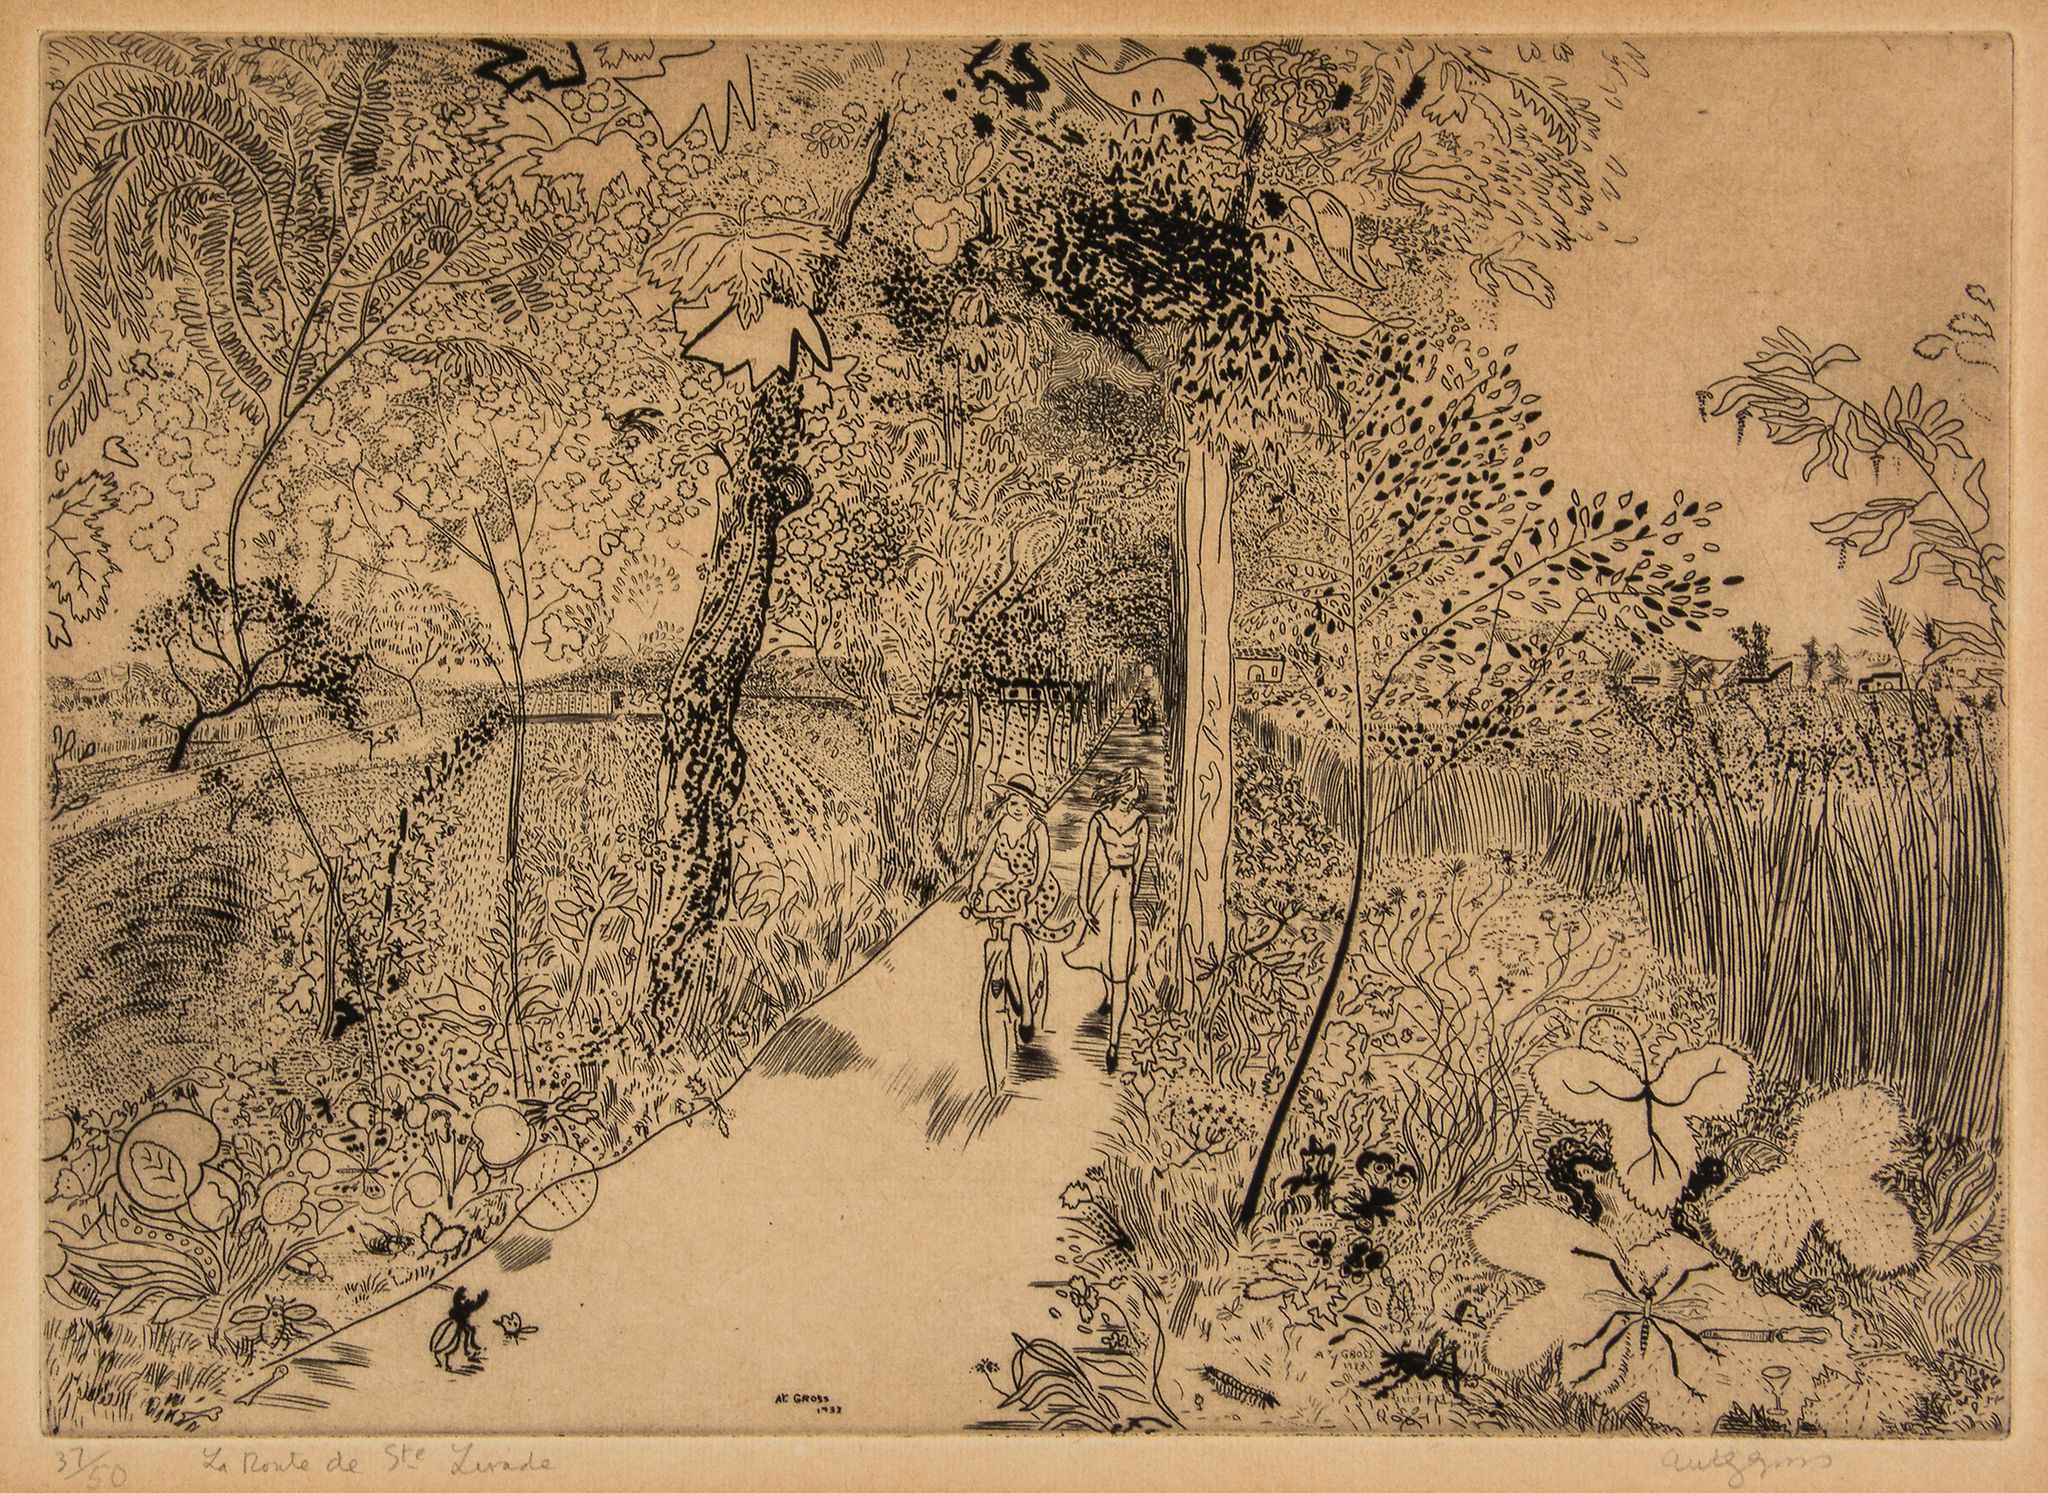 Anthony Gross (1905-1984) - La Route de Sainte Livrade etching, 1933, signed and titled in pencil,